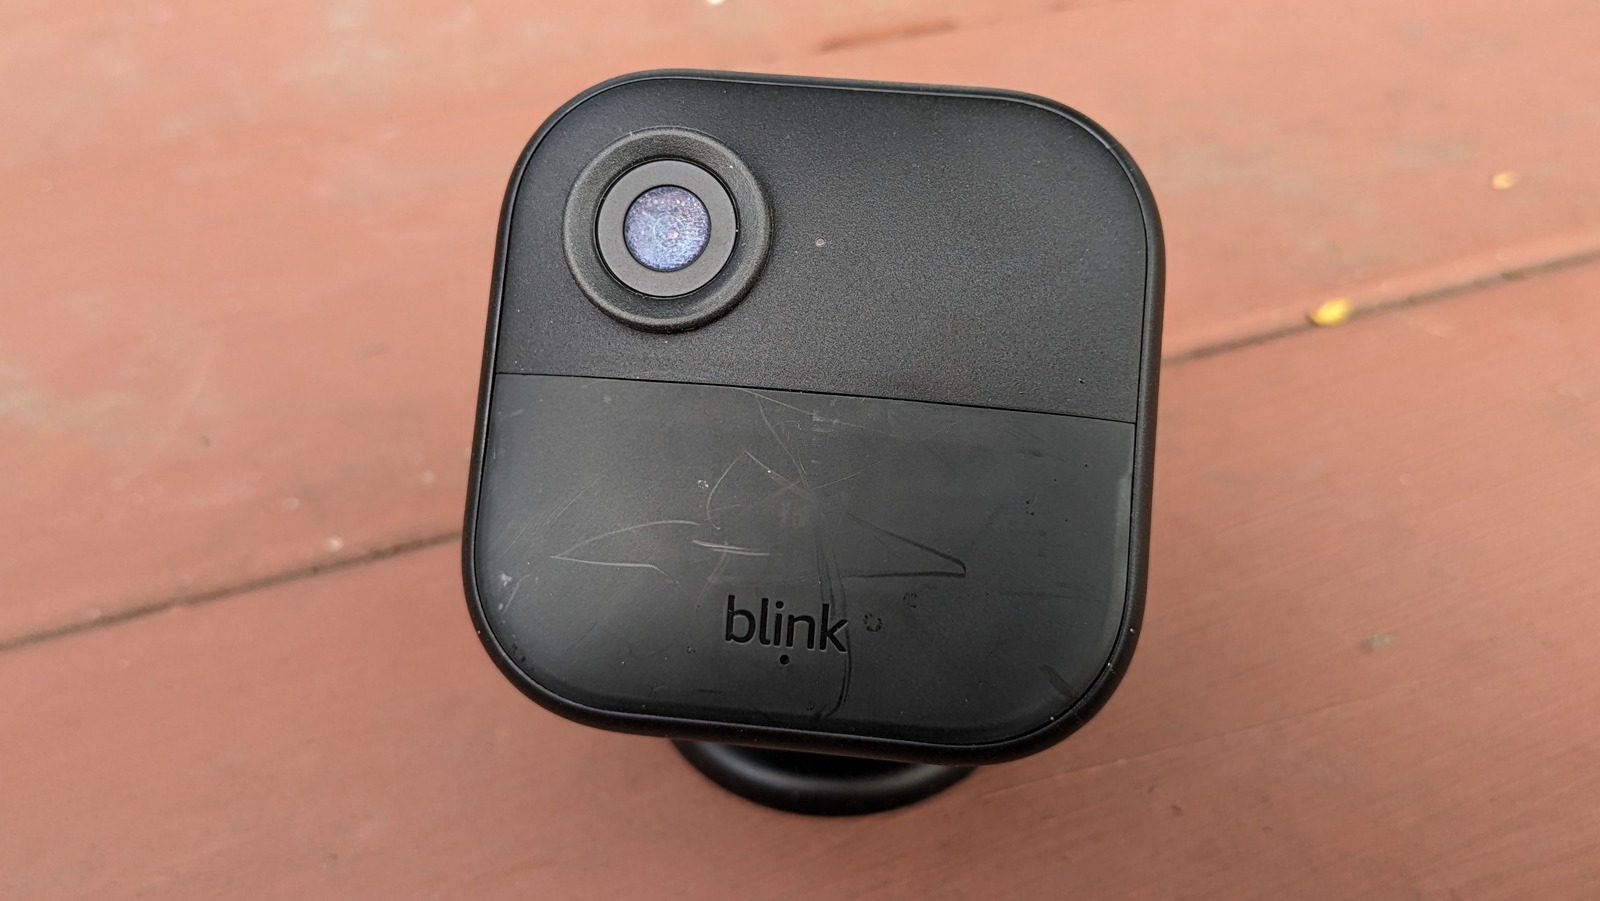 Blink Cameras Review: Are They Any Good?